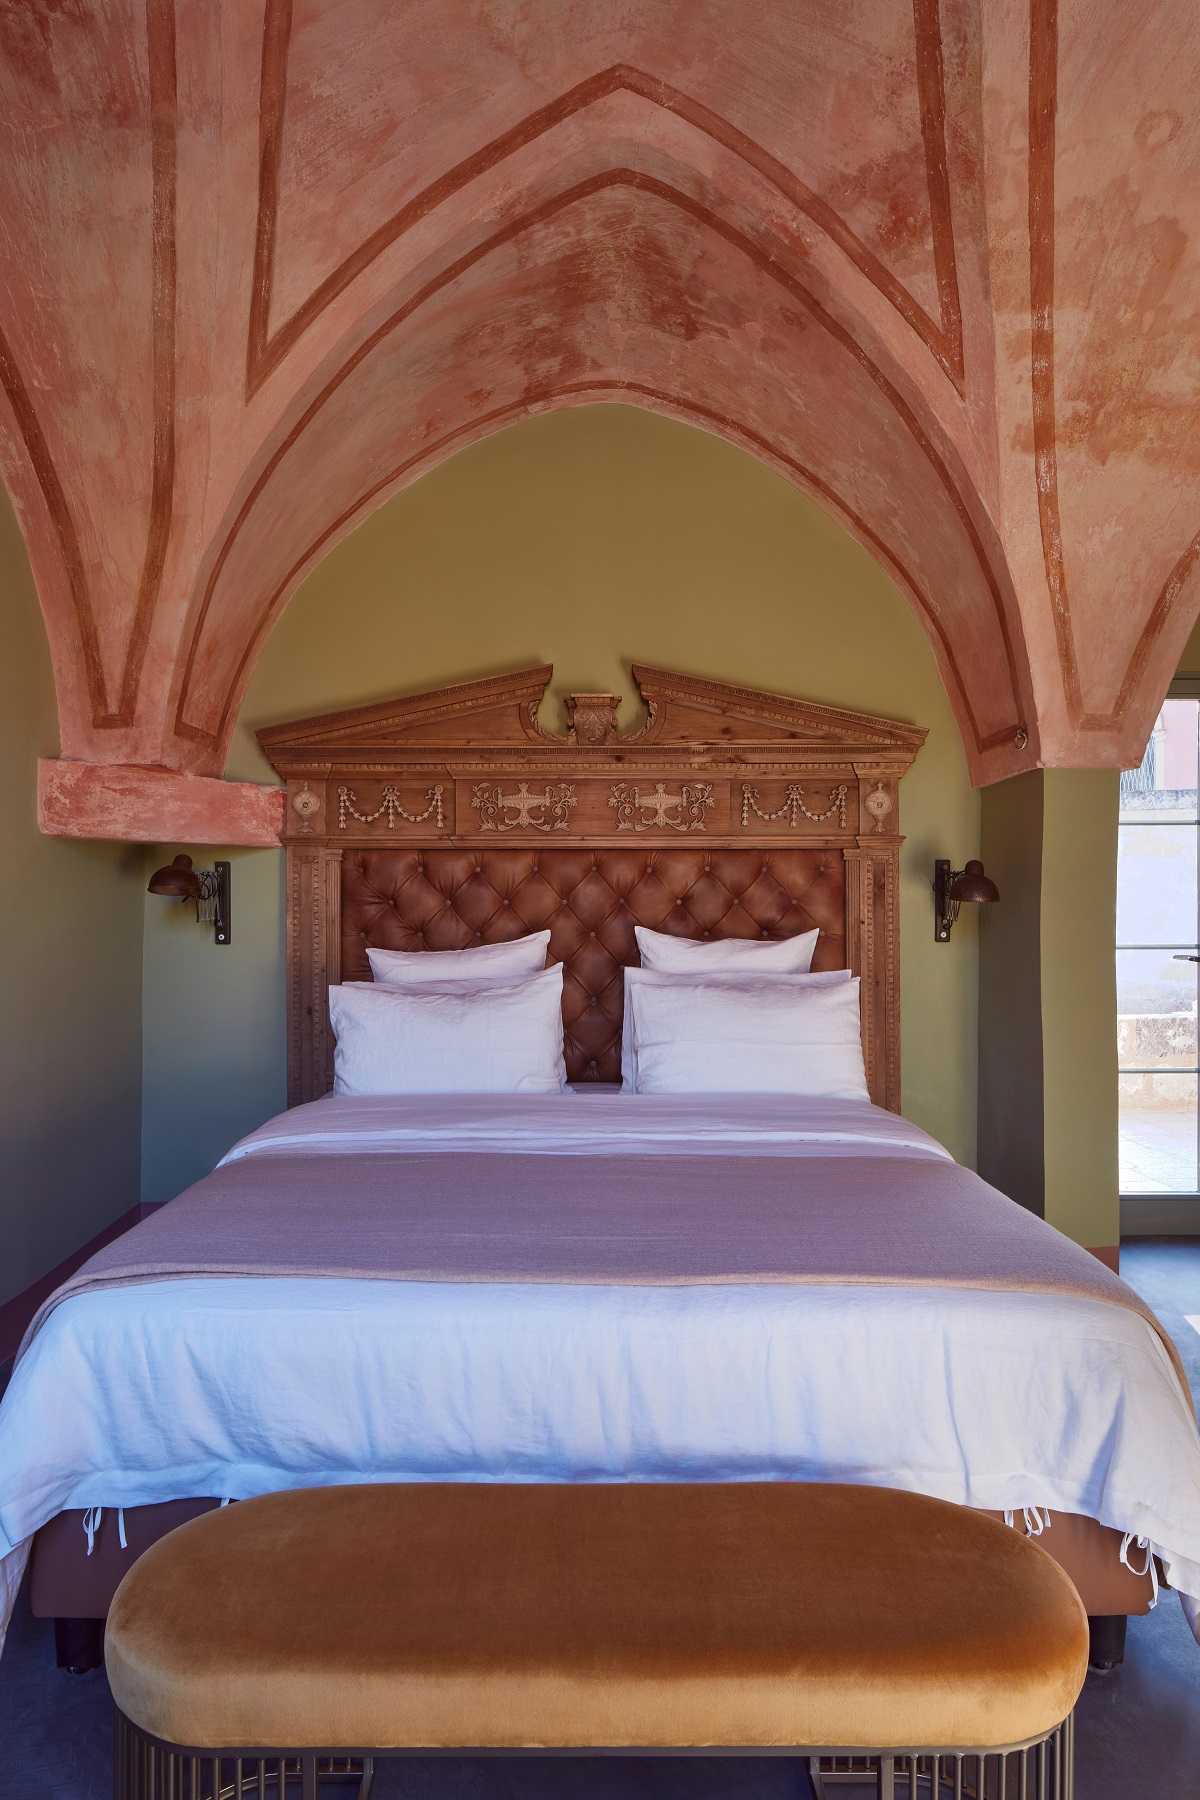 the vaulted ceilings in the guestroom in the restored masseria at tower elvira